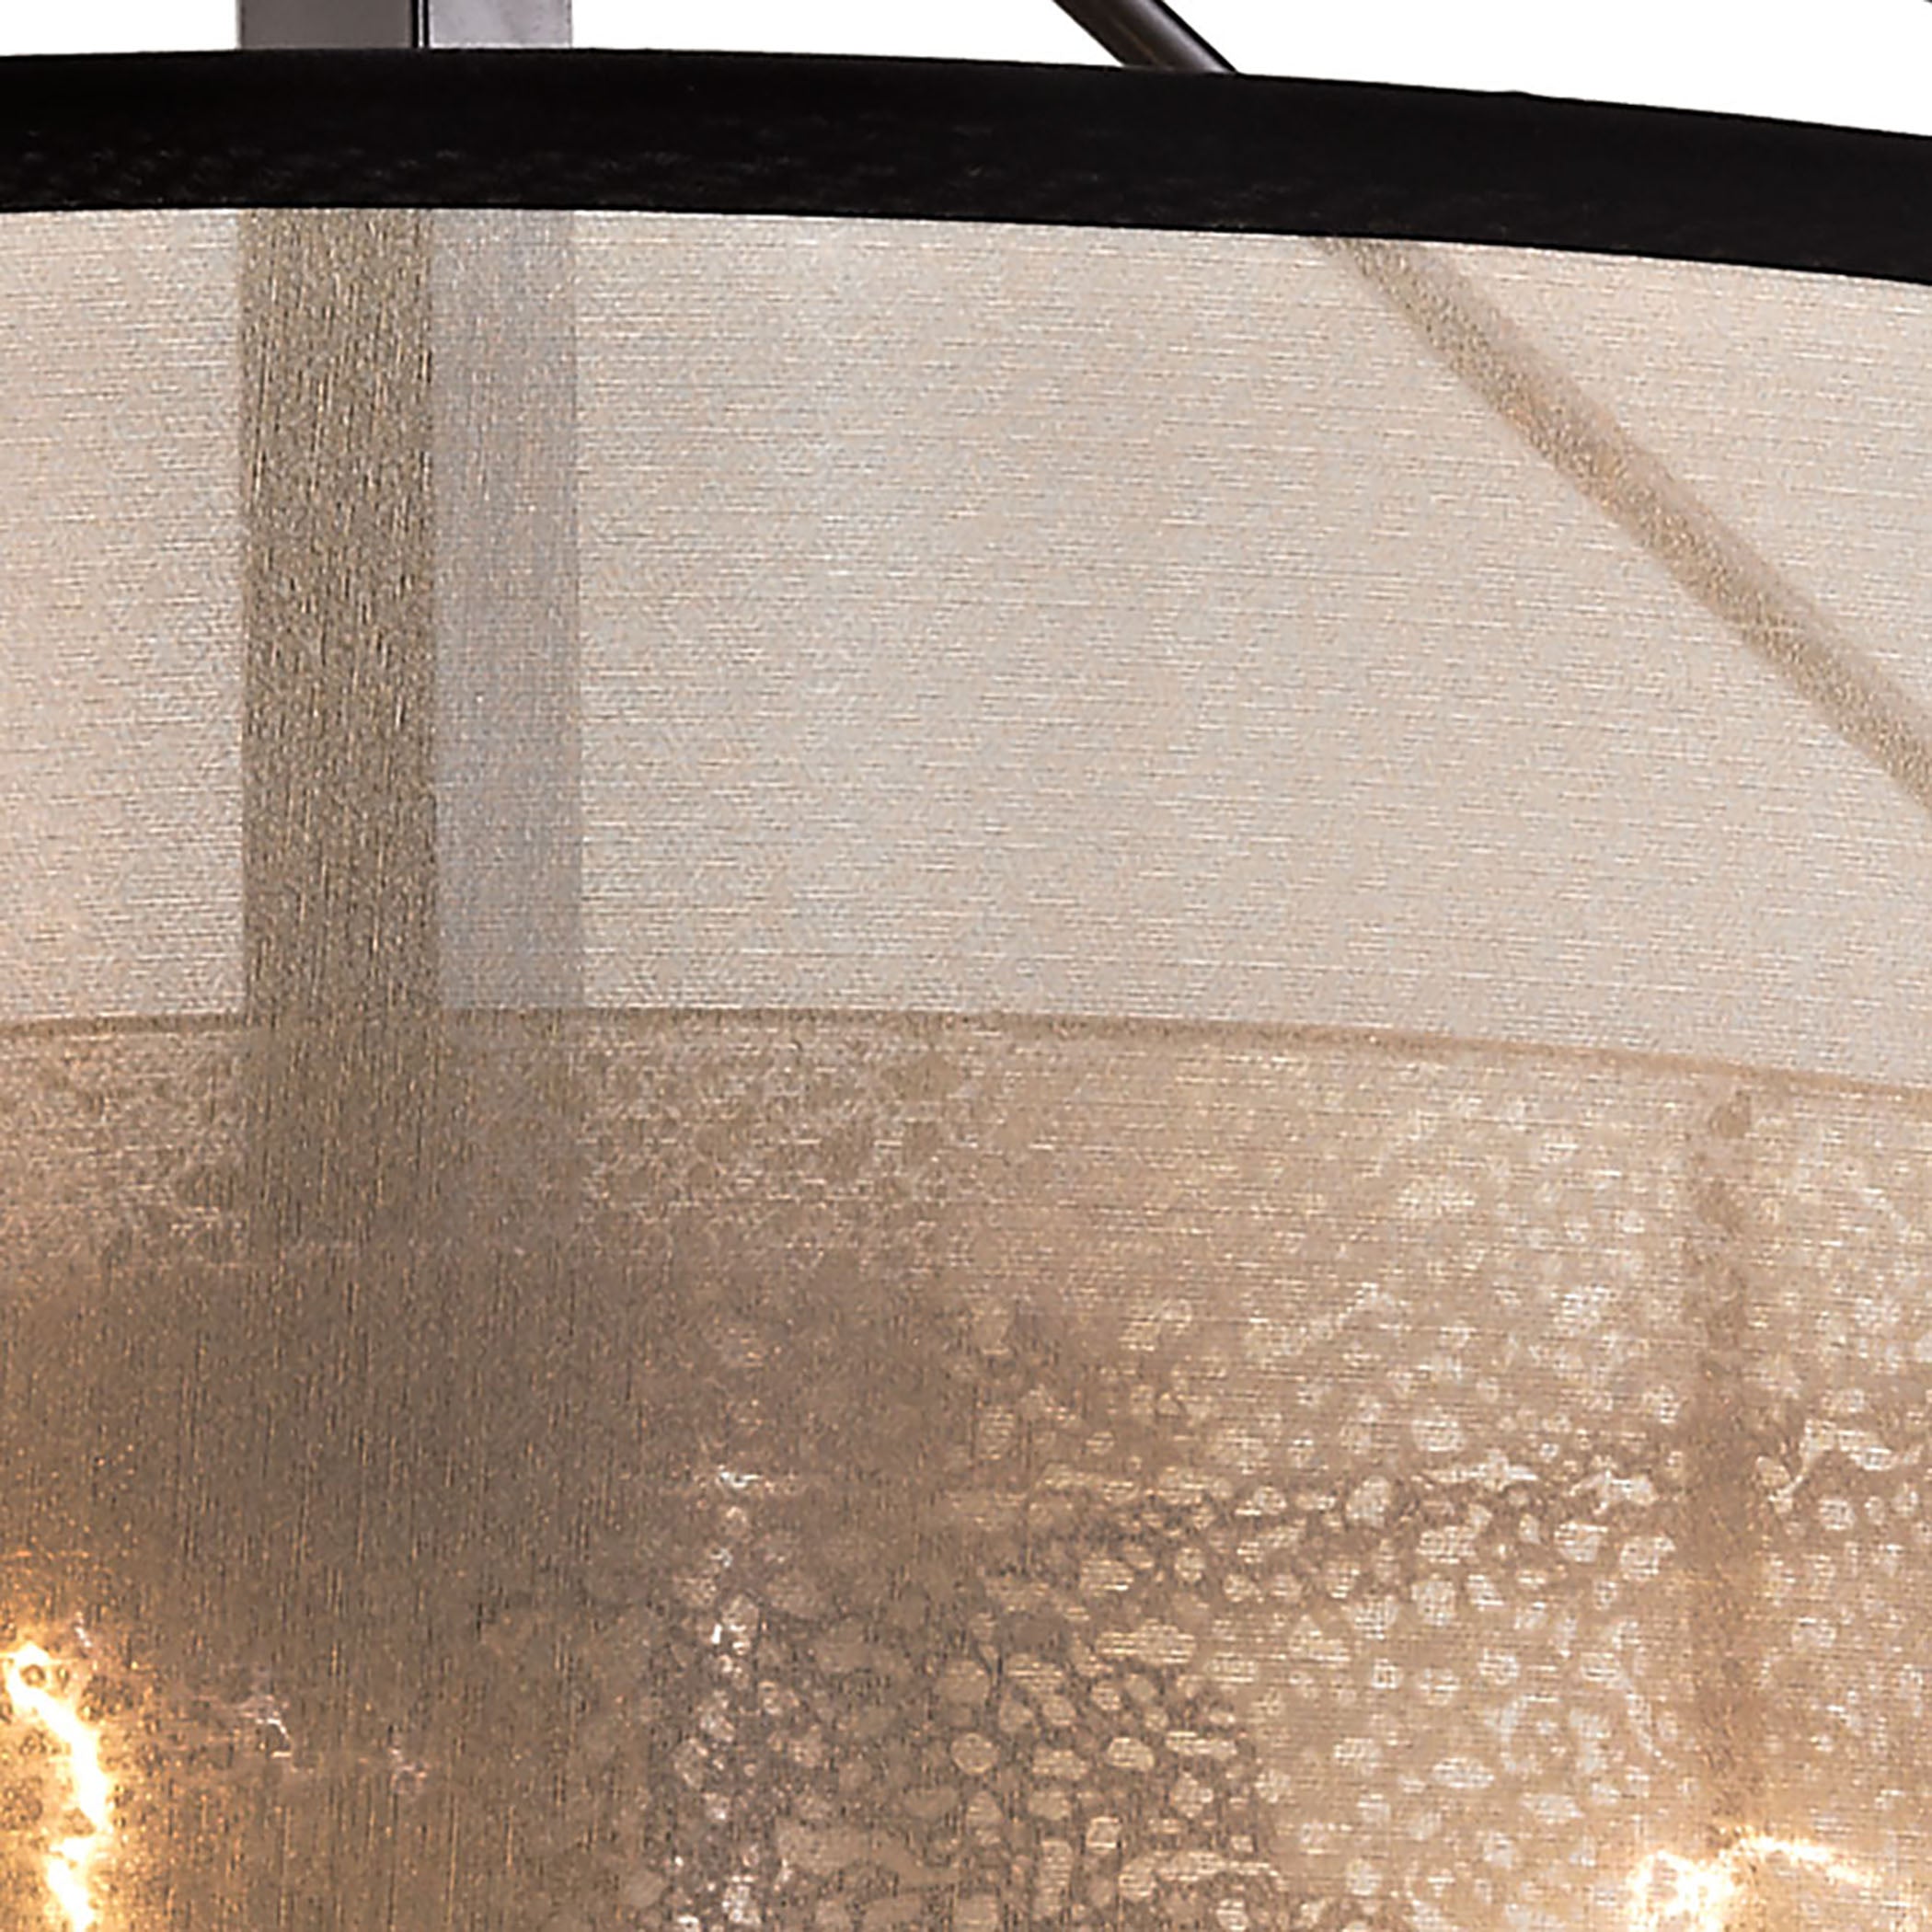 ELK Lighting 57024/3 Diffusion 3-Light Semi Flush in Oiled Bronze with Organza and Mercury Glass